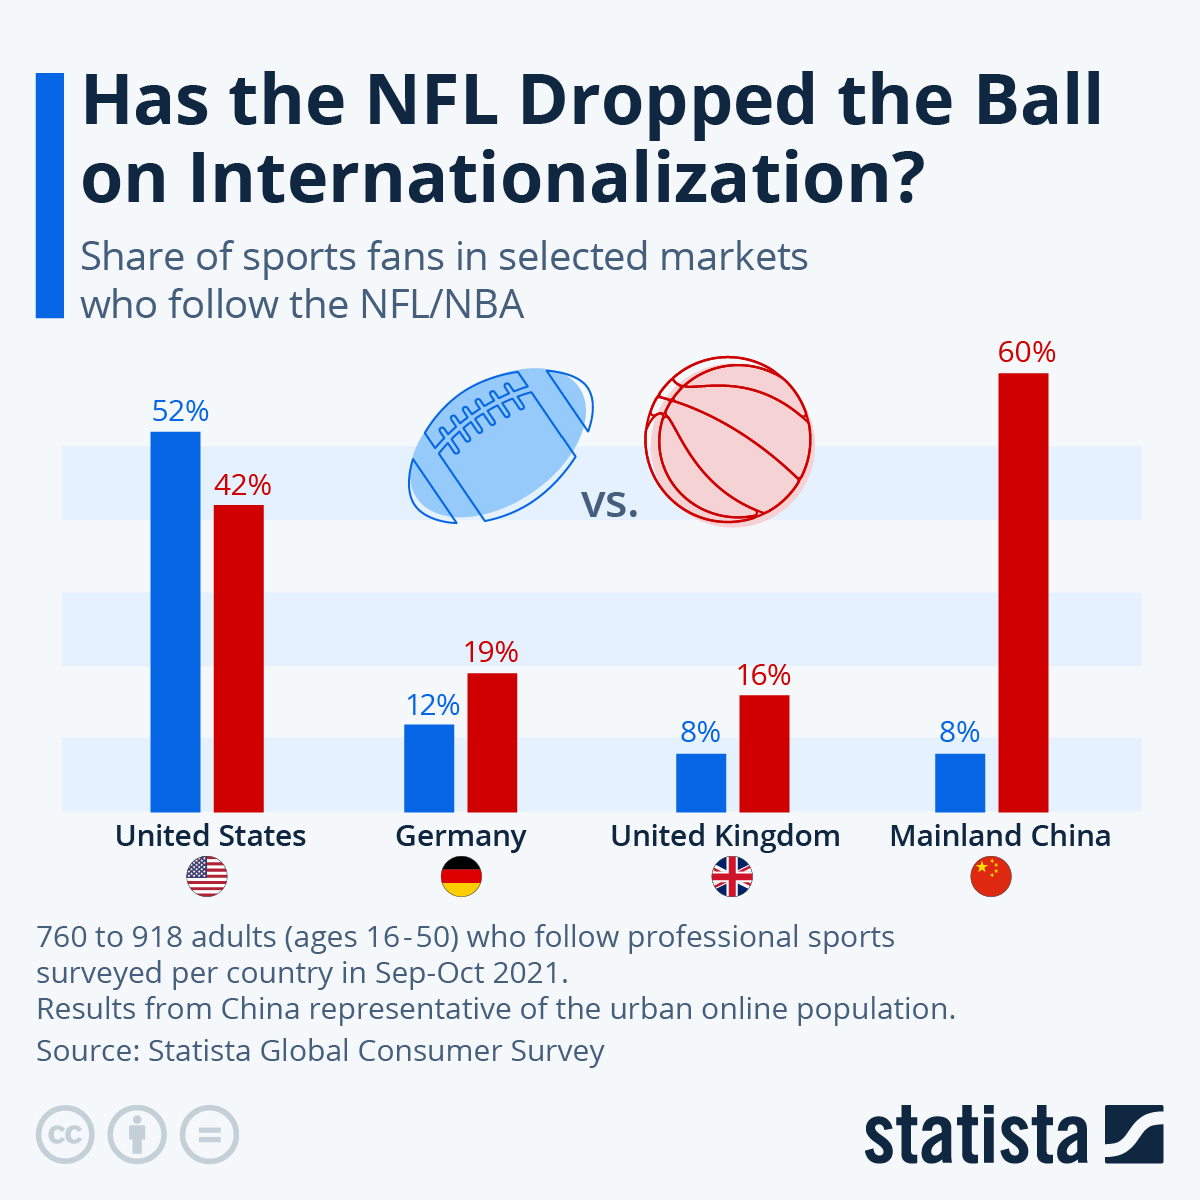 Has the NFL dropped the ball on internationalization?